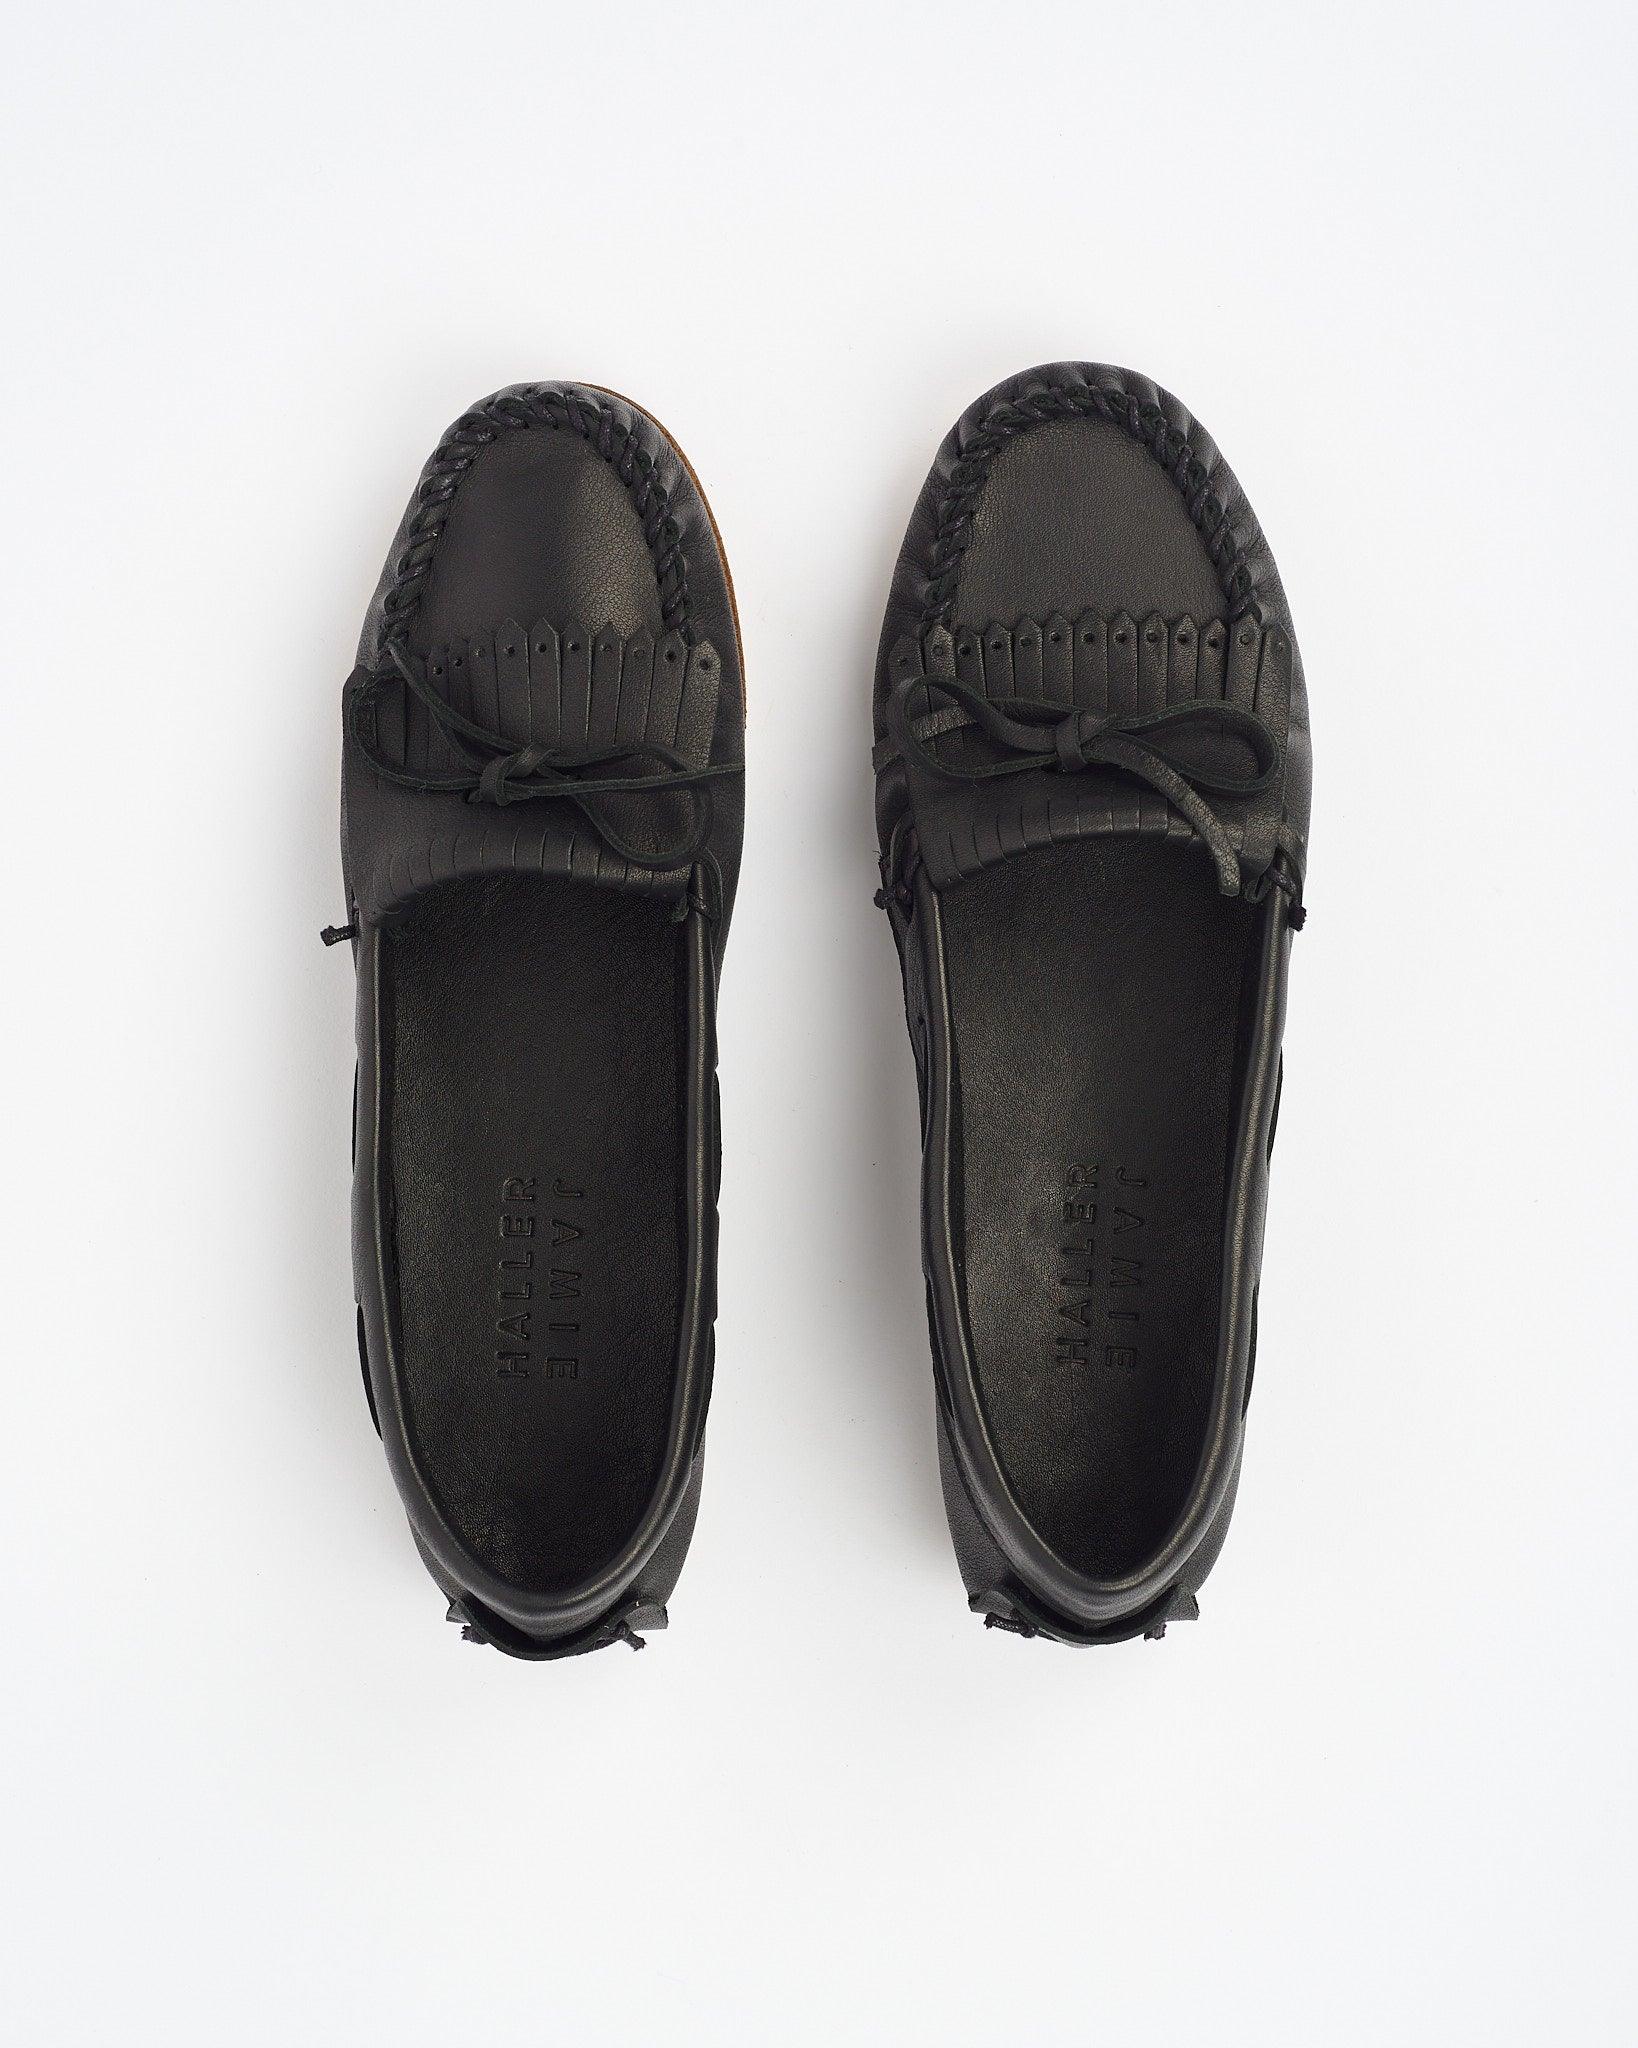 Camp Loafer in Black Flat View